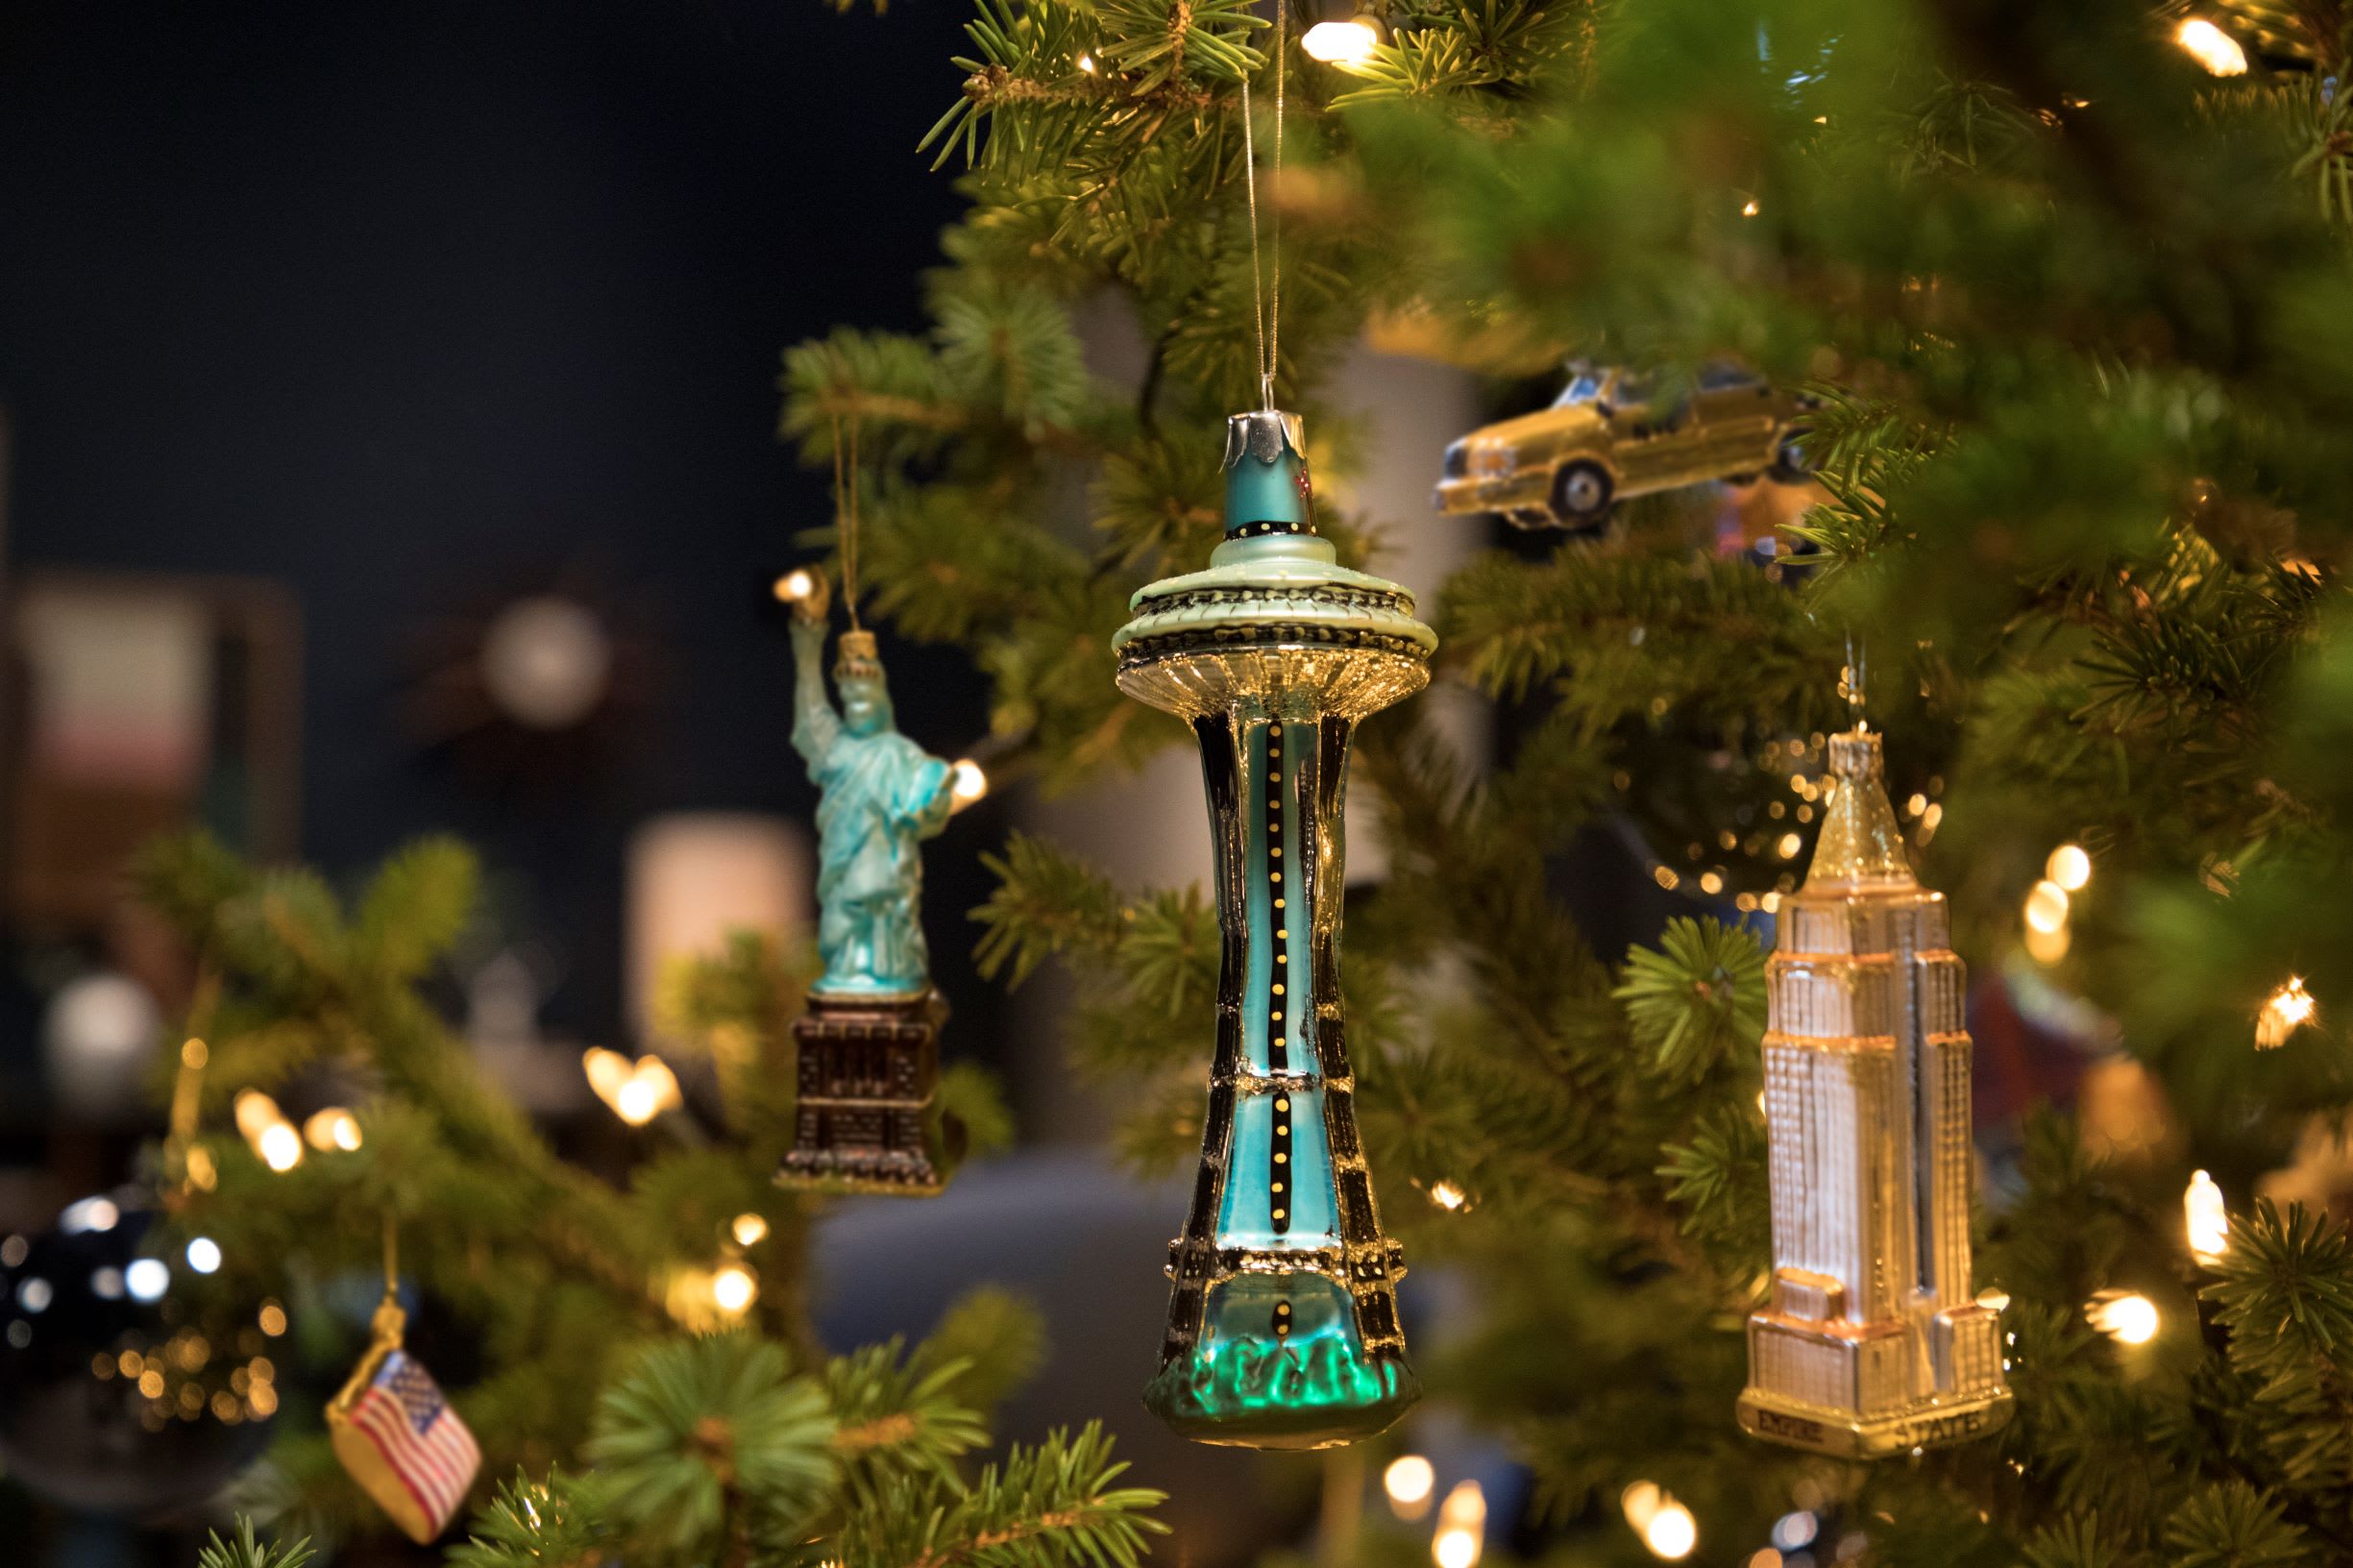 a collection of Christmas decorations on a tree, one being the Seattle needle and another being the statue of liberty